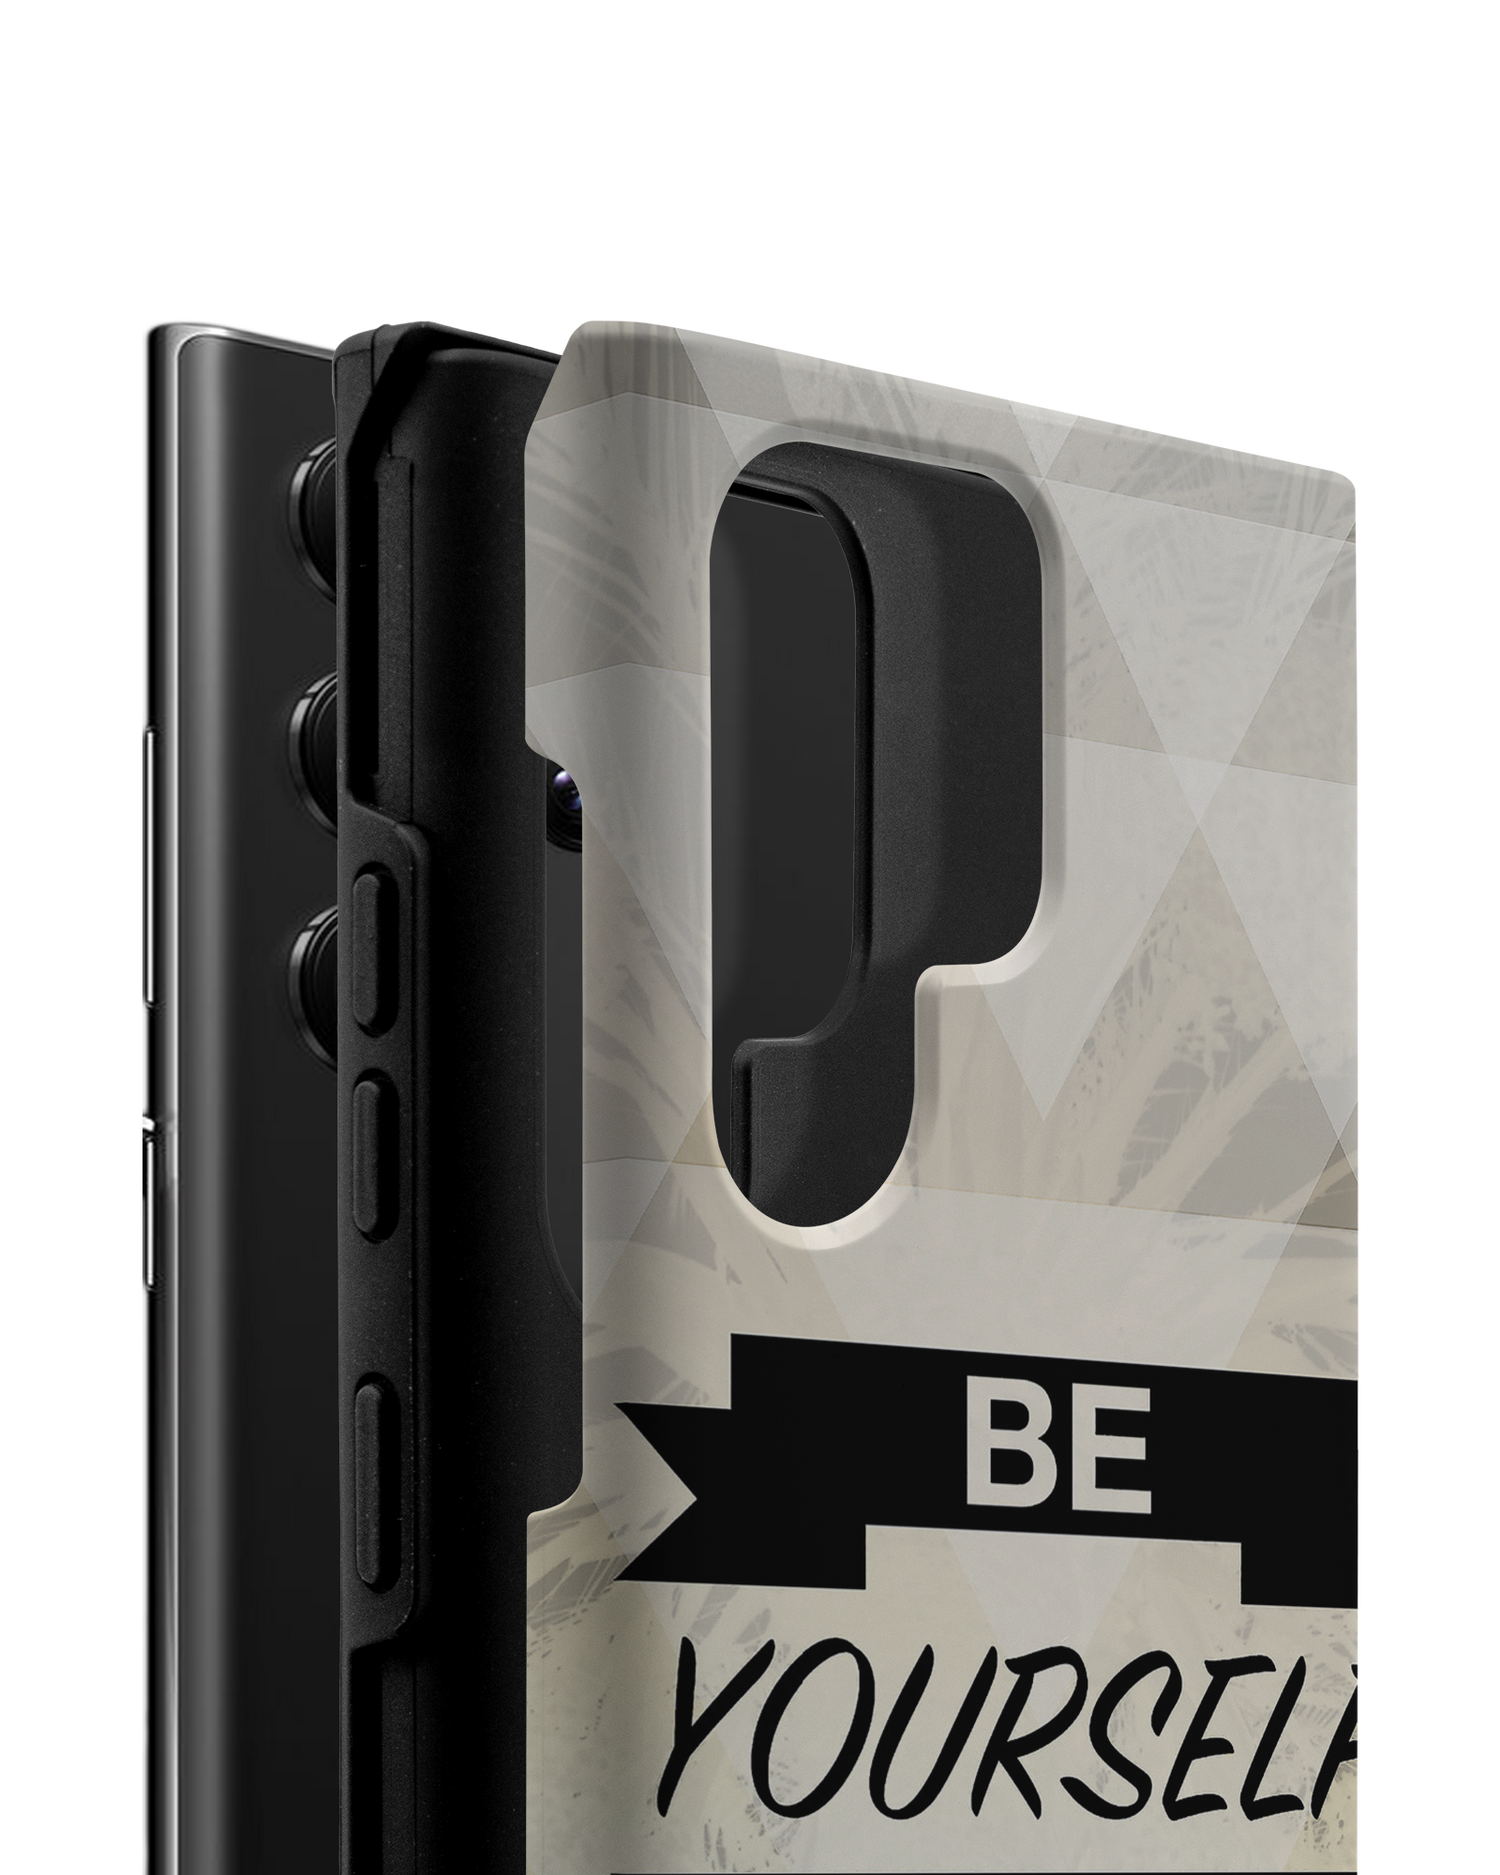 Be Yourself Premium Phone Case Samsung Galaxy S22 Ultra 5G consisting of 2 parts